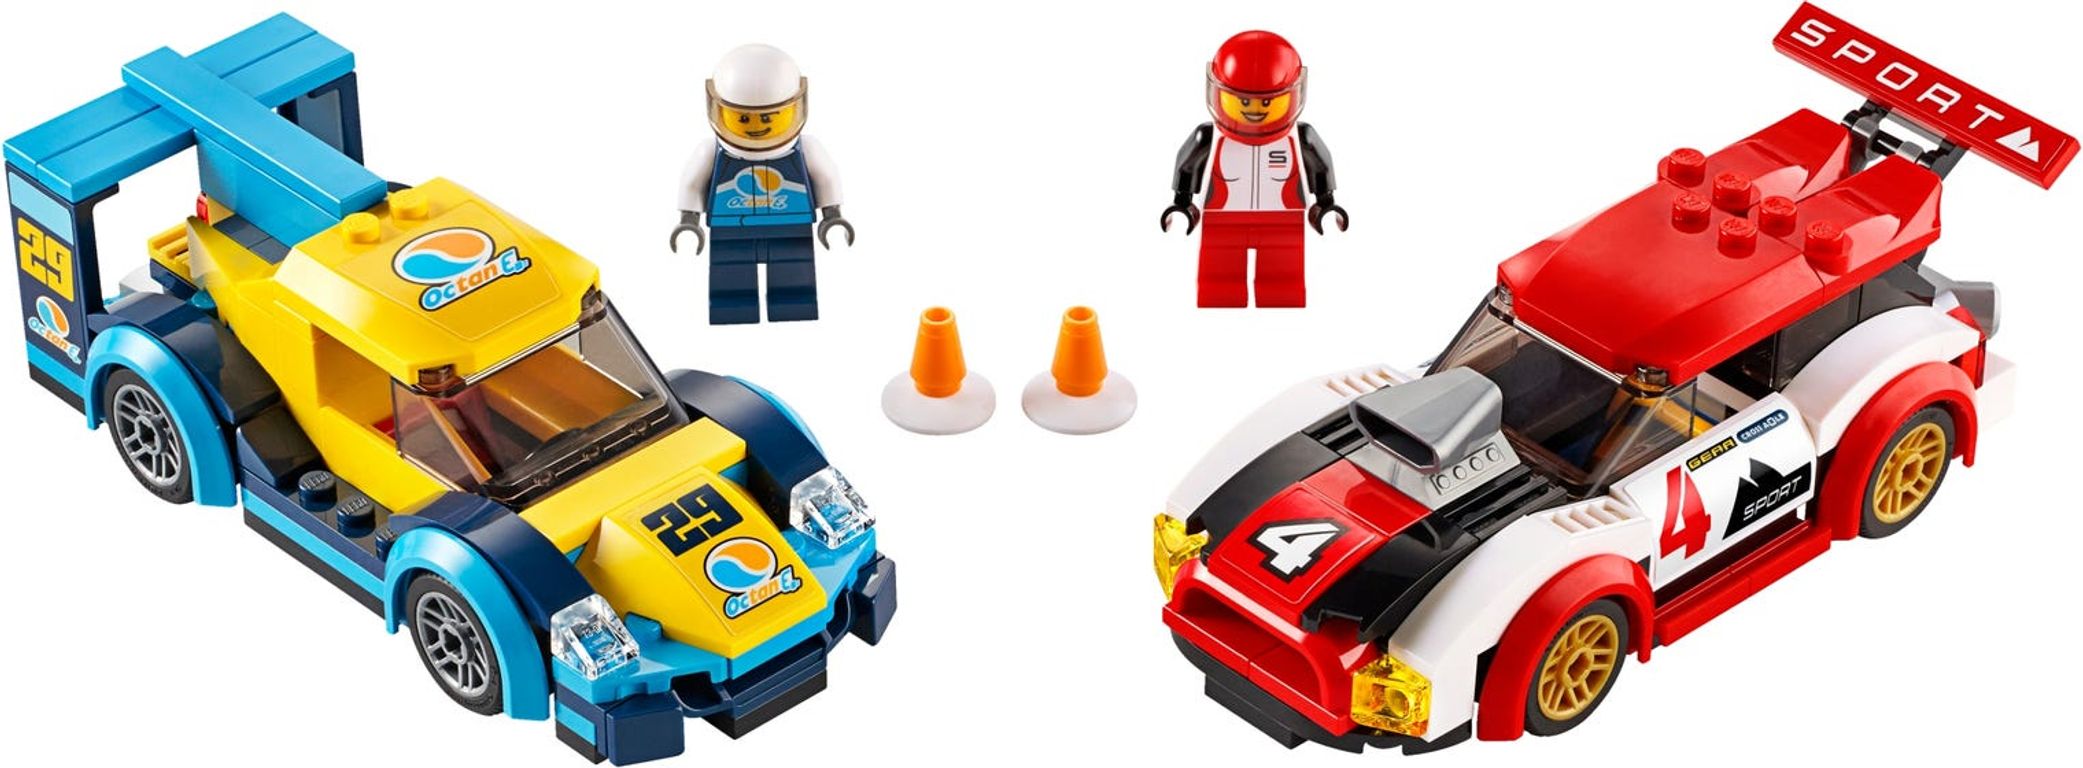 LEGO® City Racing Cars components